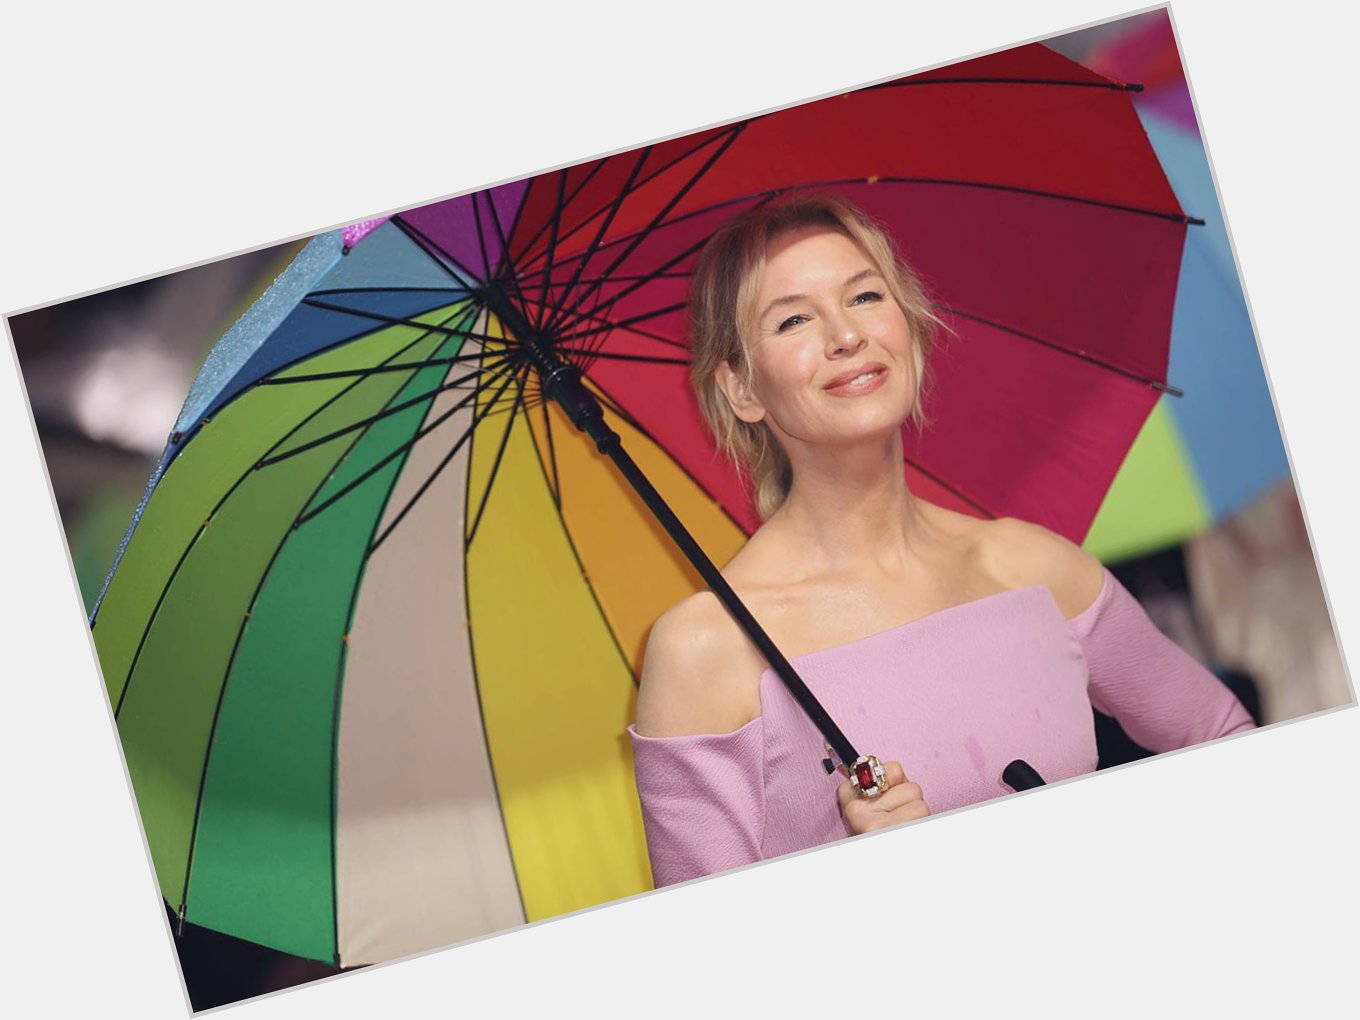 Happy birthday to miss renée zellweger, i would die for you ANY DAY. 51 has never looked so good <3 